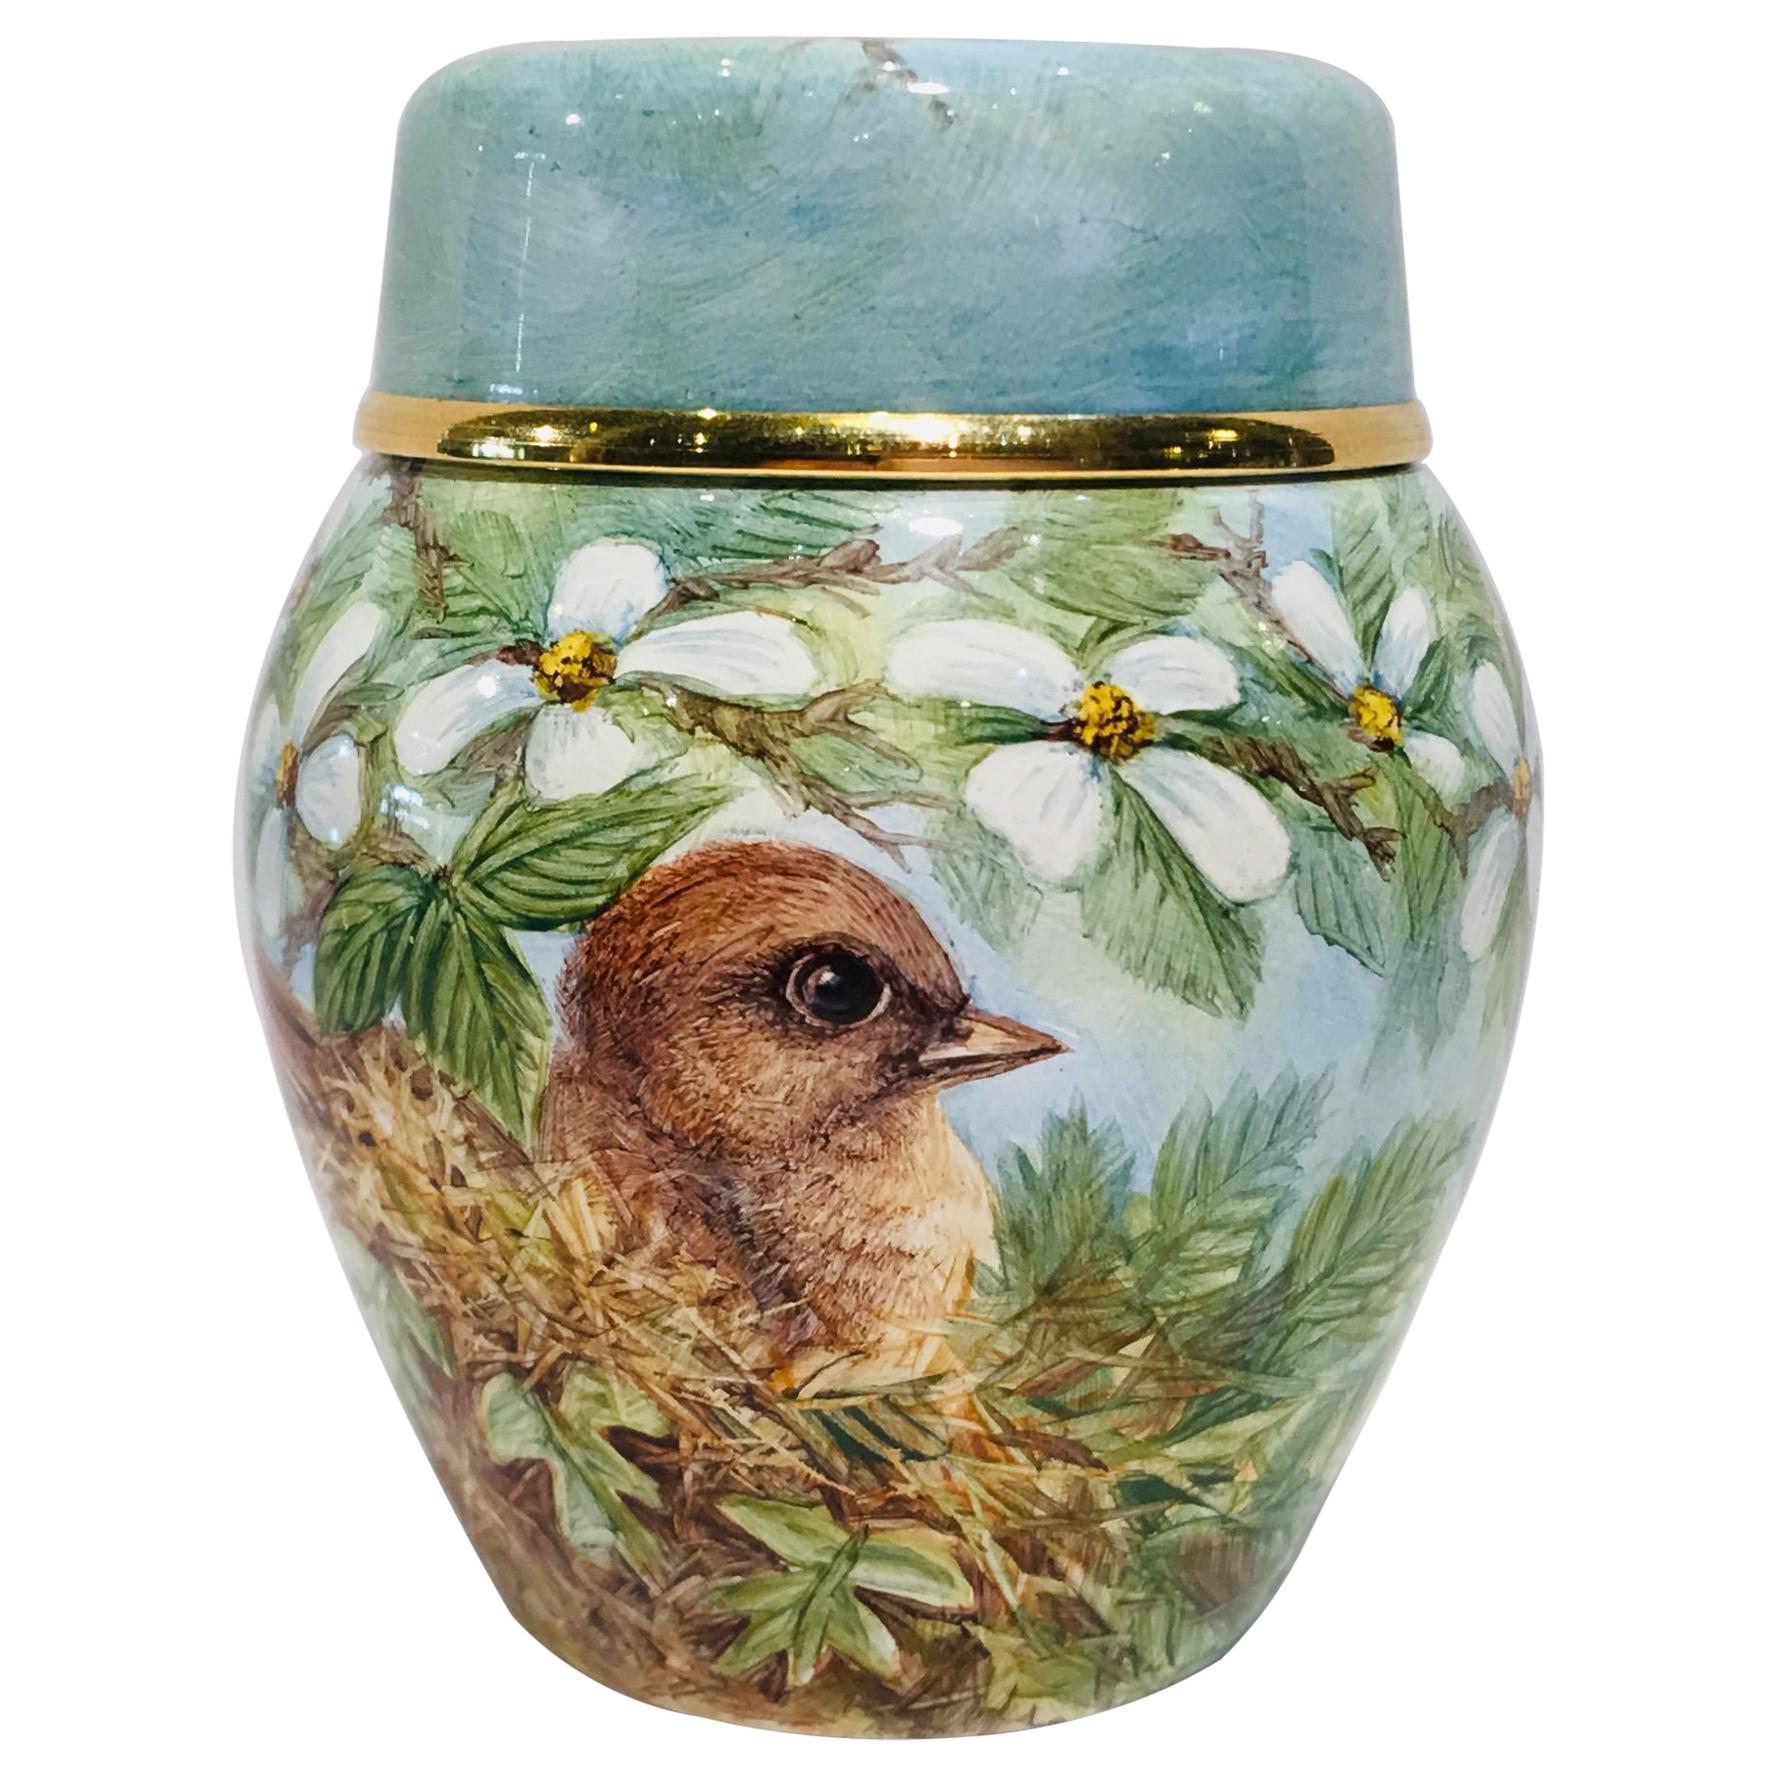 Rare Exquisite Moorcroft Enamel and Gold Limited Edition Miniature Ginger Jar